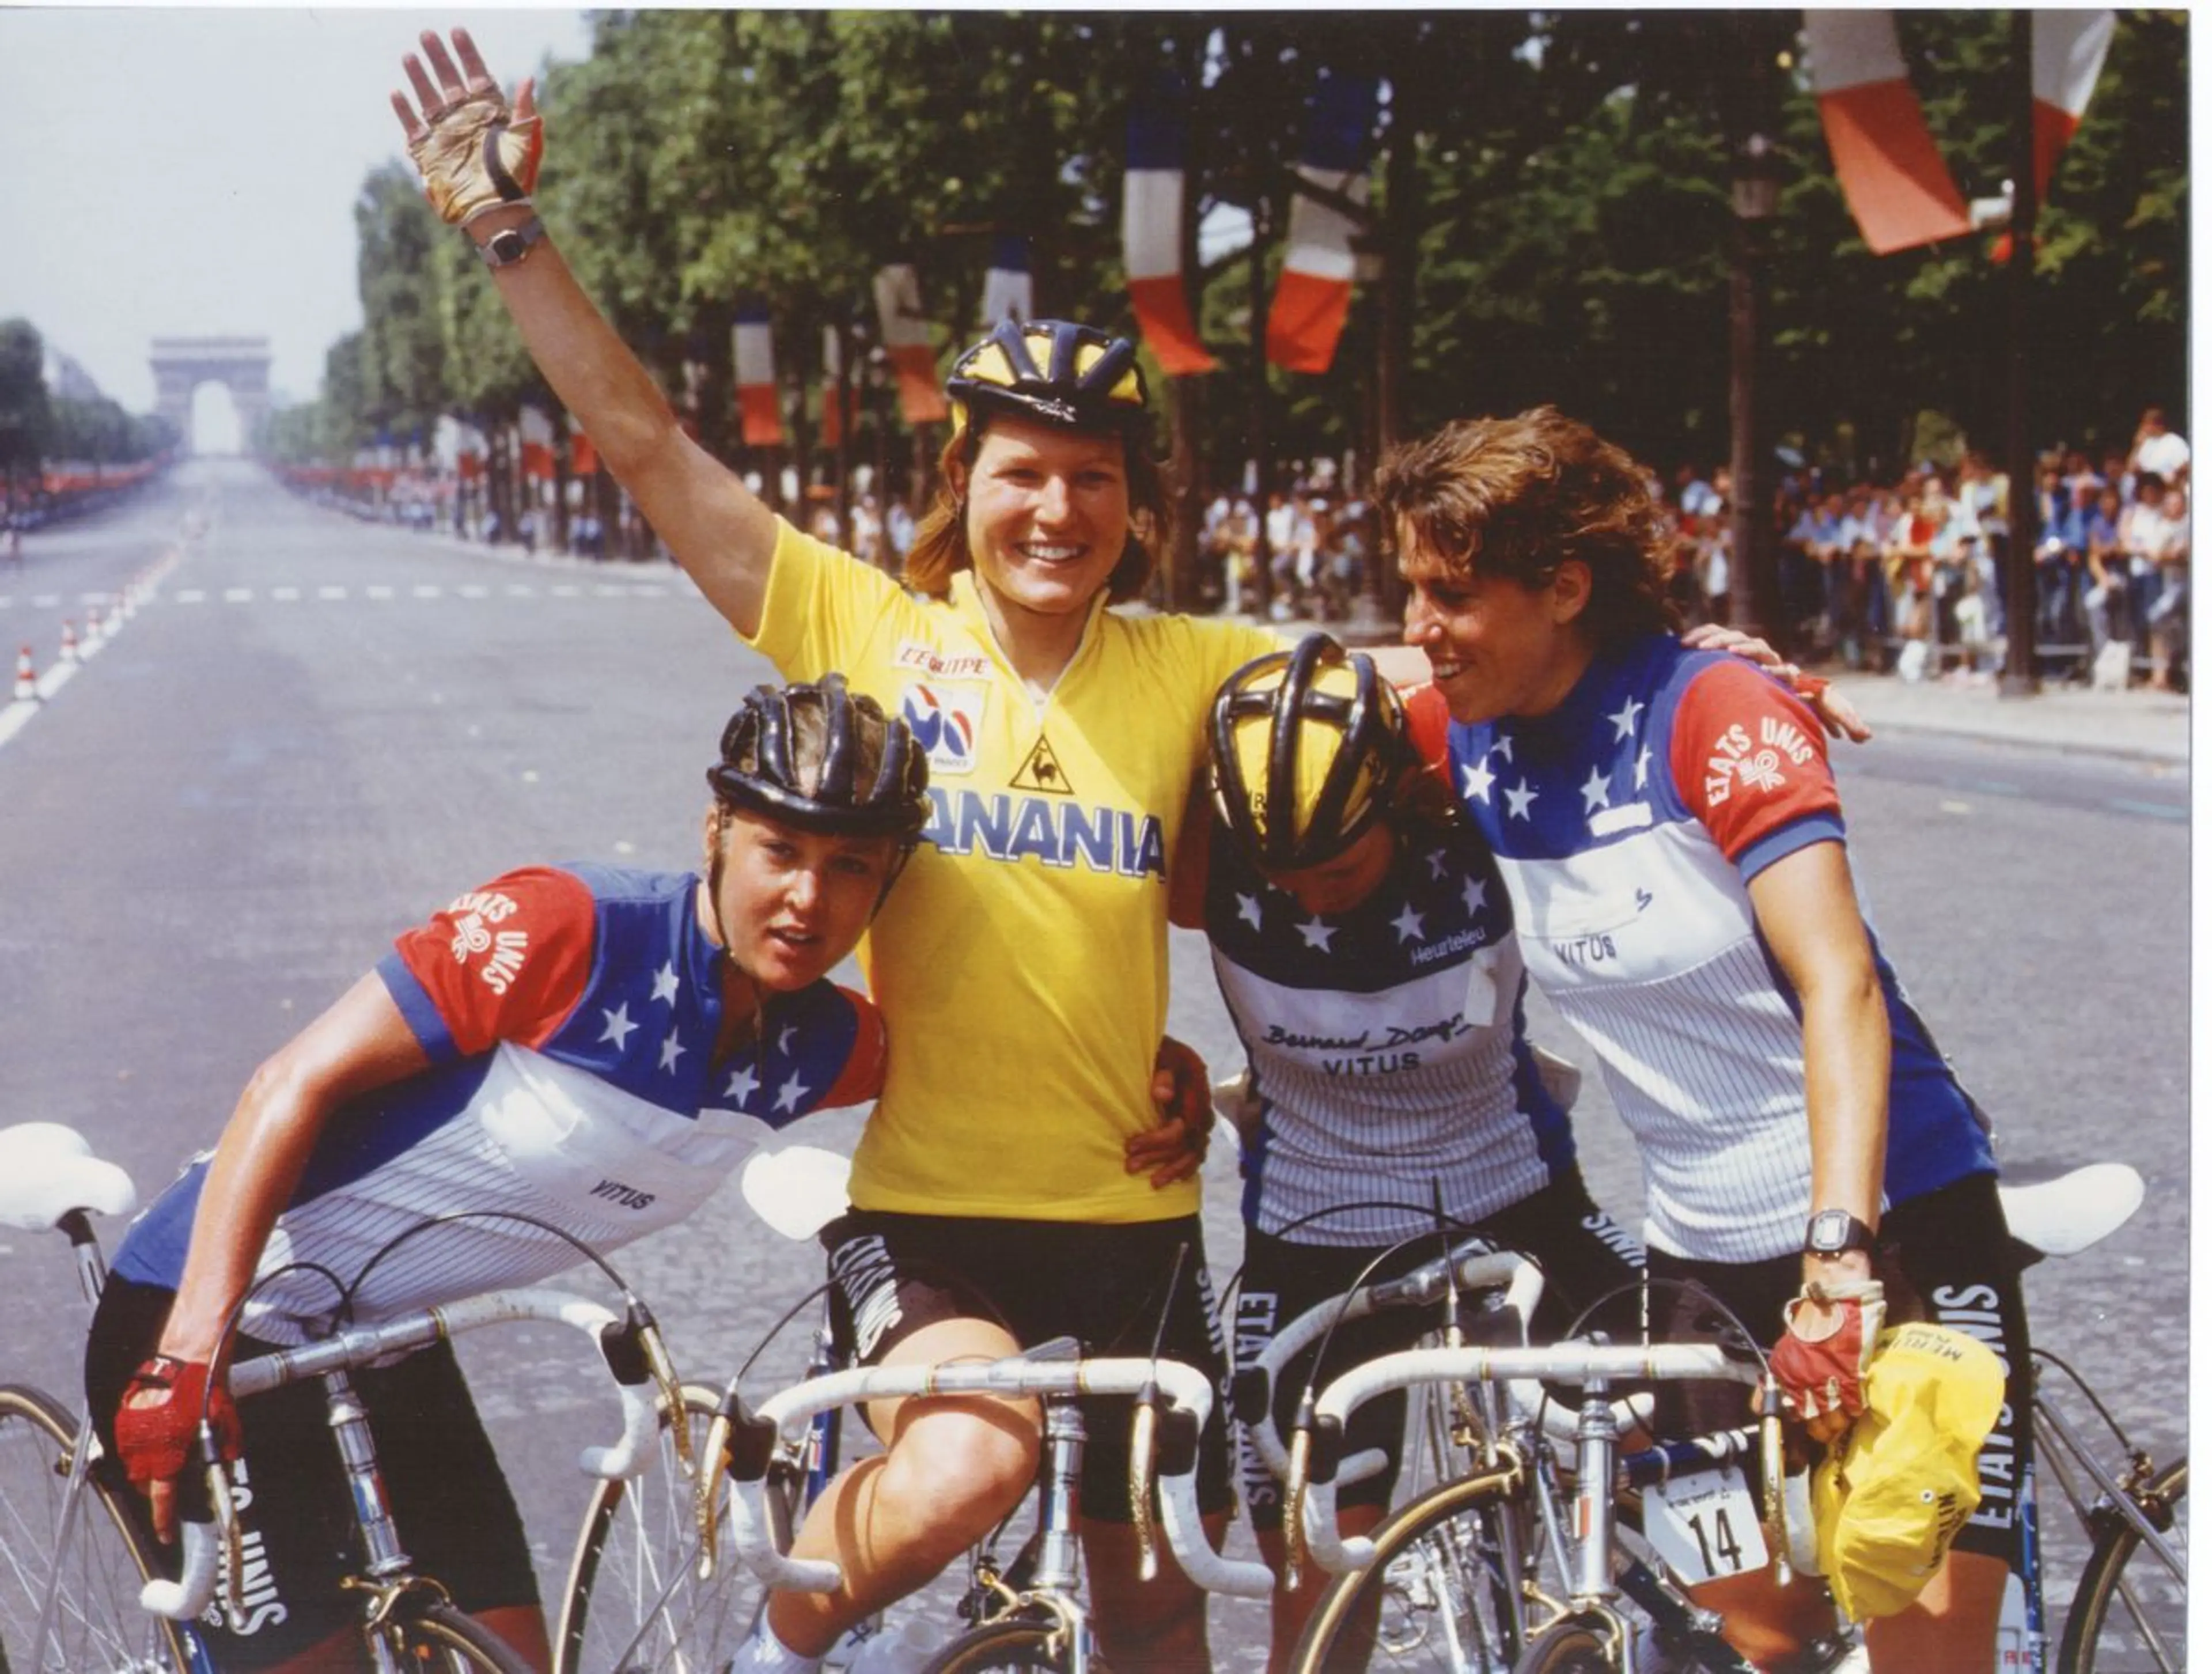 Marrianne Martin, the first female cyclist in Tour De France